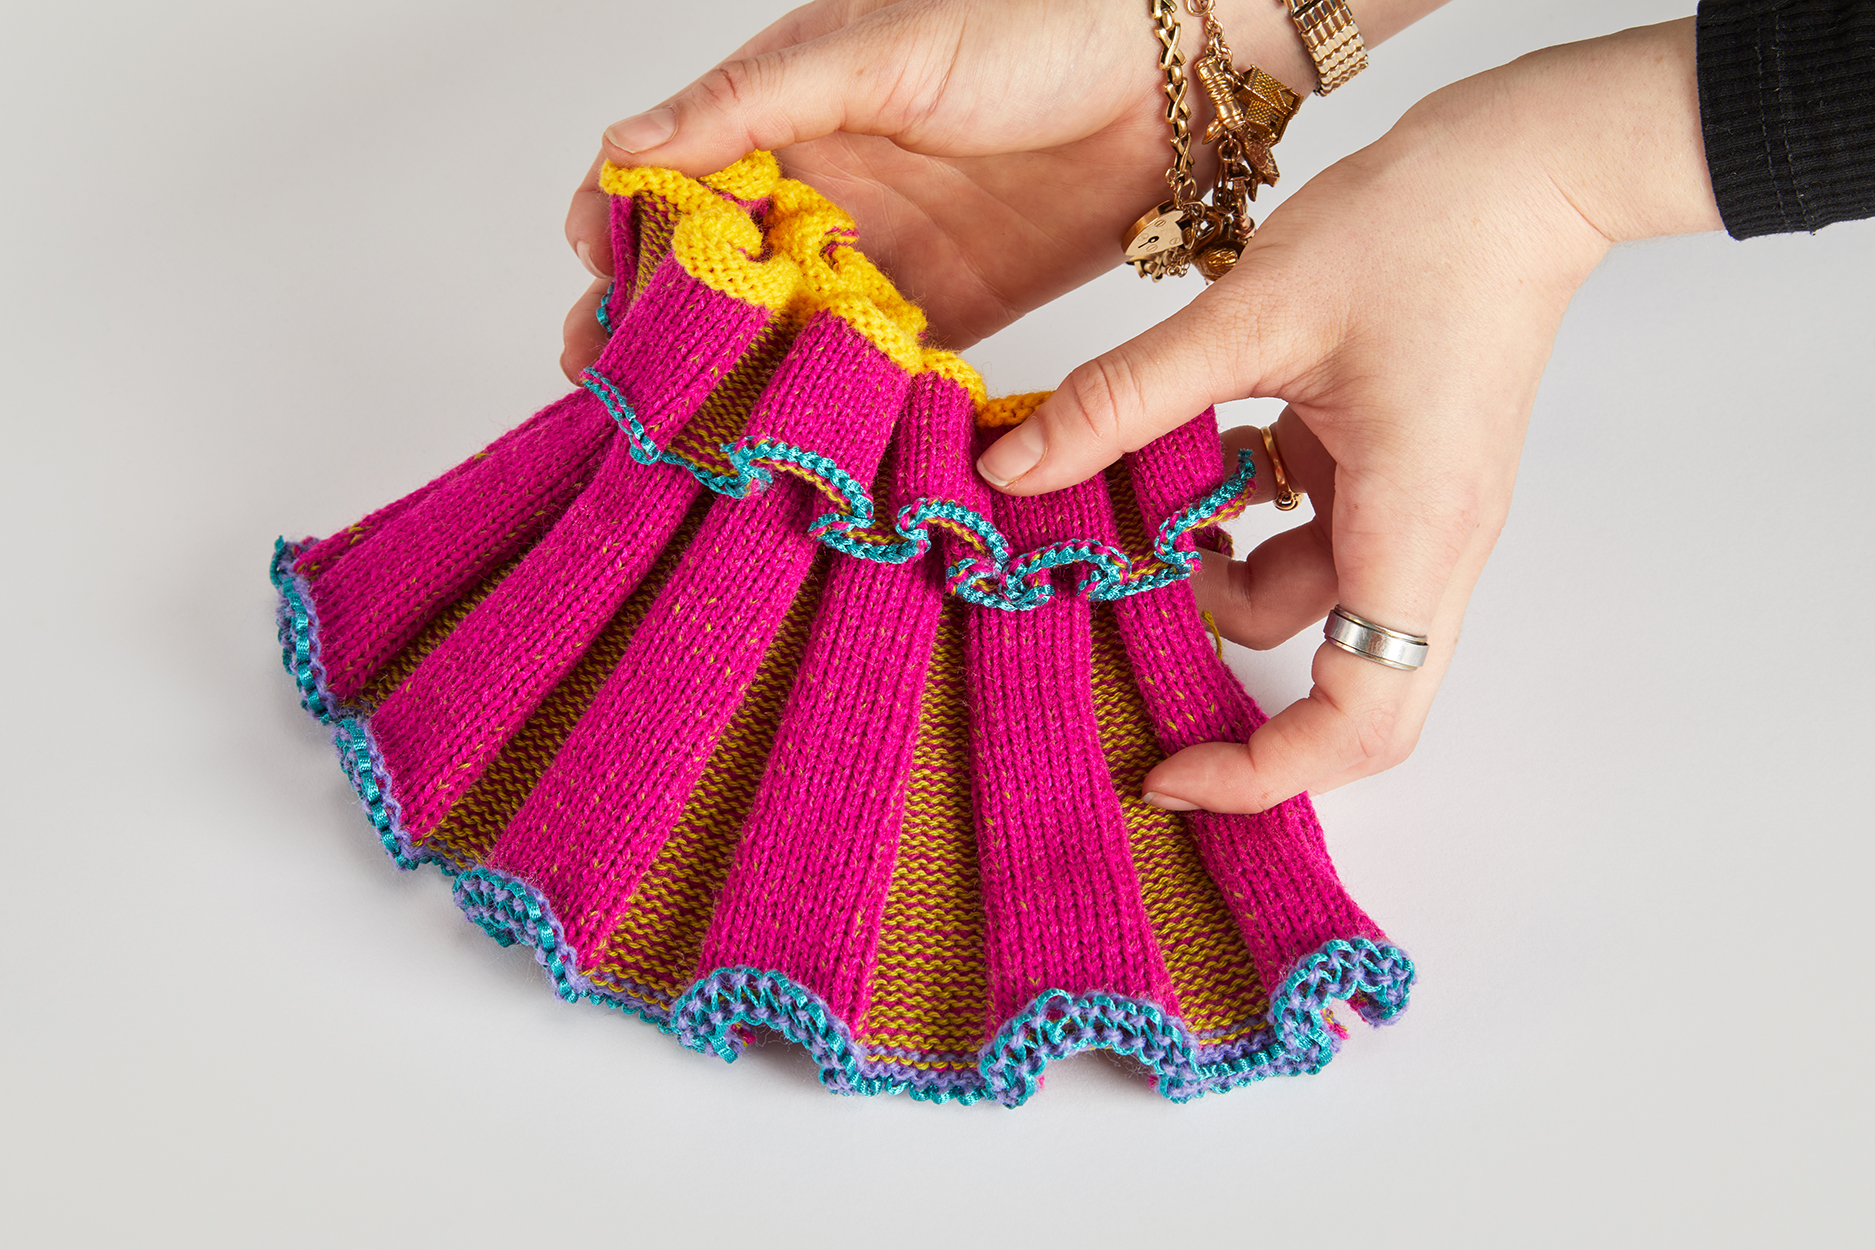 Knitted structural ruff piece; bright pink, green, yellow and blue second hand yarns come together into a maximalist exploration of structural possibilities within knitwear.